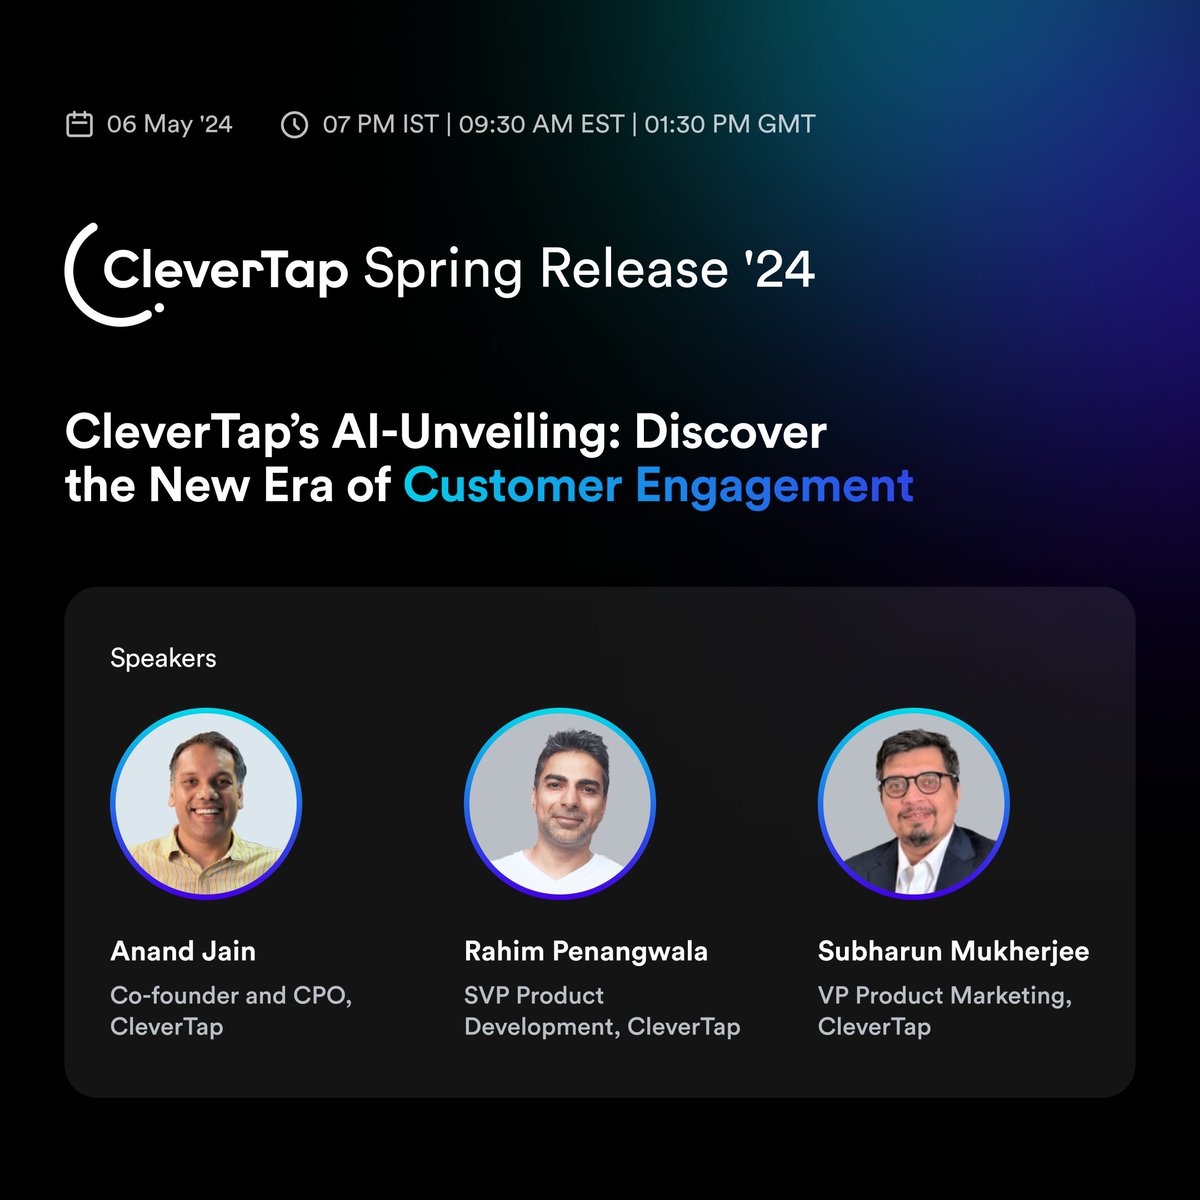 #curtAInsUp Day 1 at CleverTap's #SpringRelease24 📅 Come meet Clever.AI, and discover how AI can redefine the way you understand your customers. We have @helloanand, Rahim Penangwala, and Subharun Mukherjee kicking things off! 🚀 bit.ly/4cYGhuj #AI